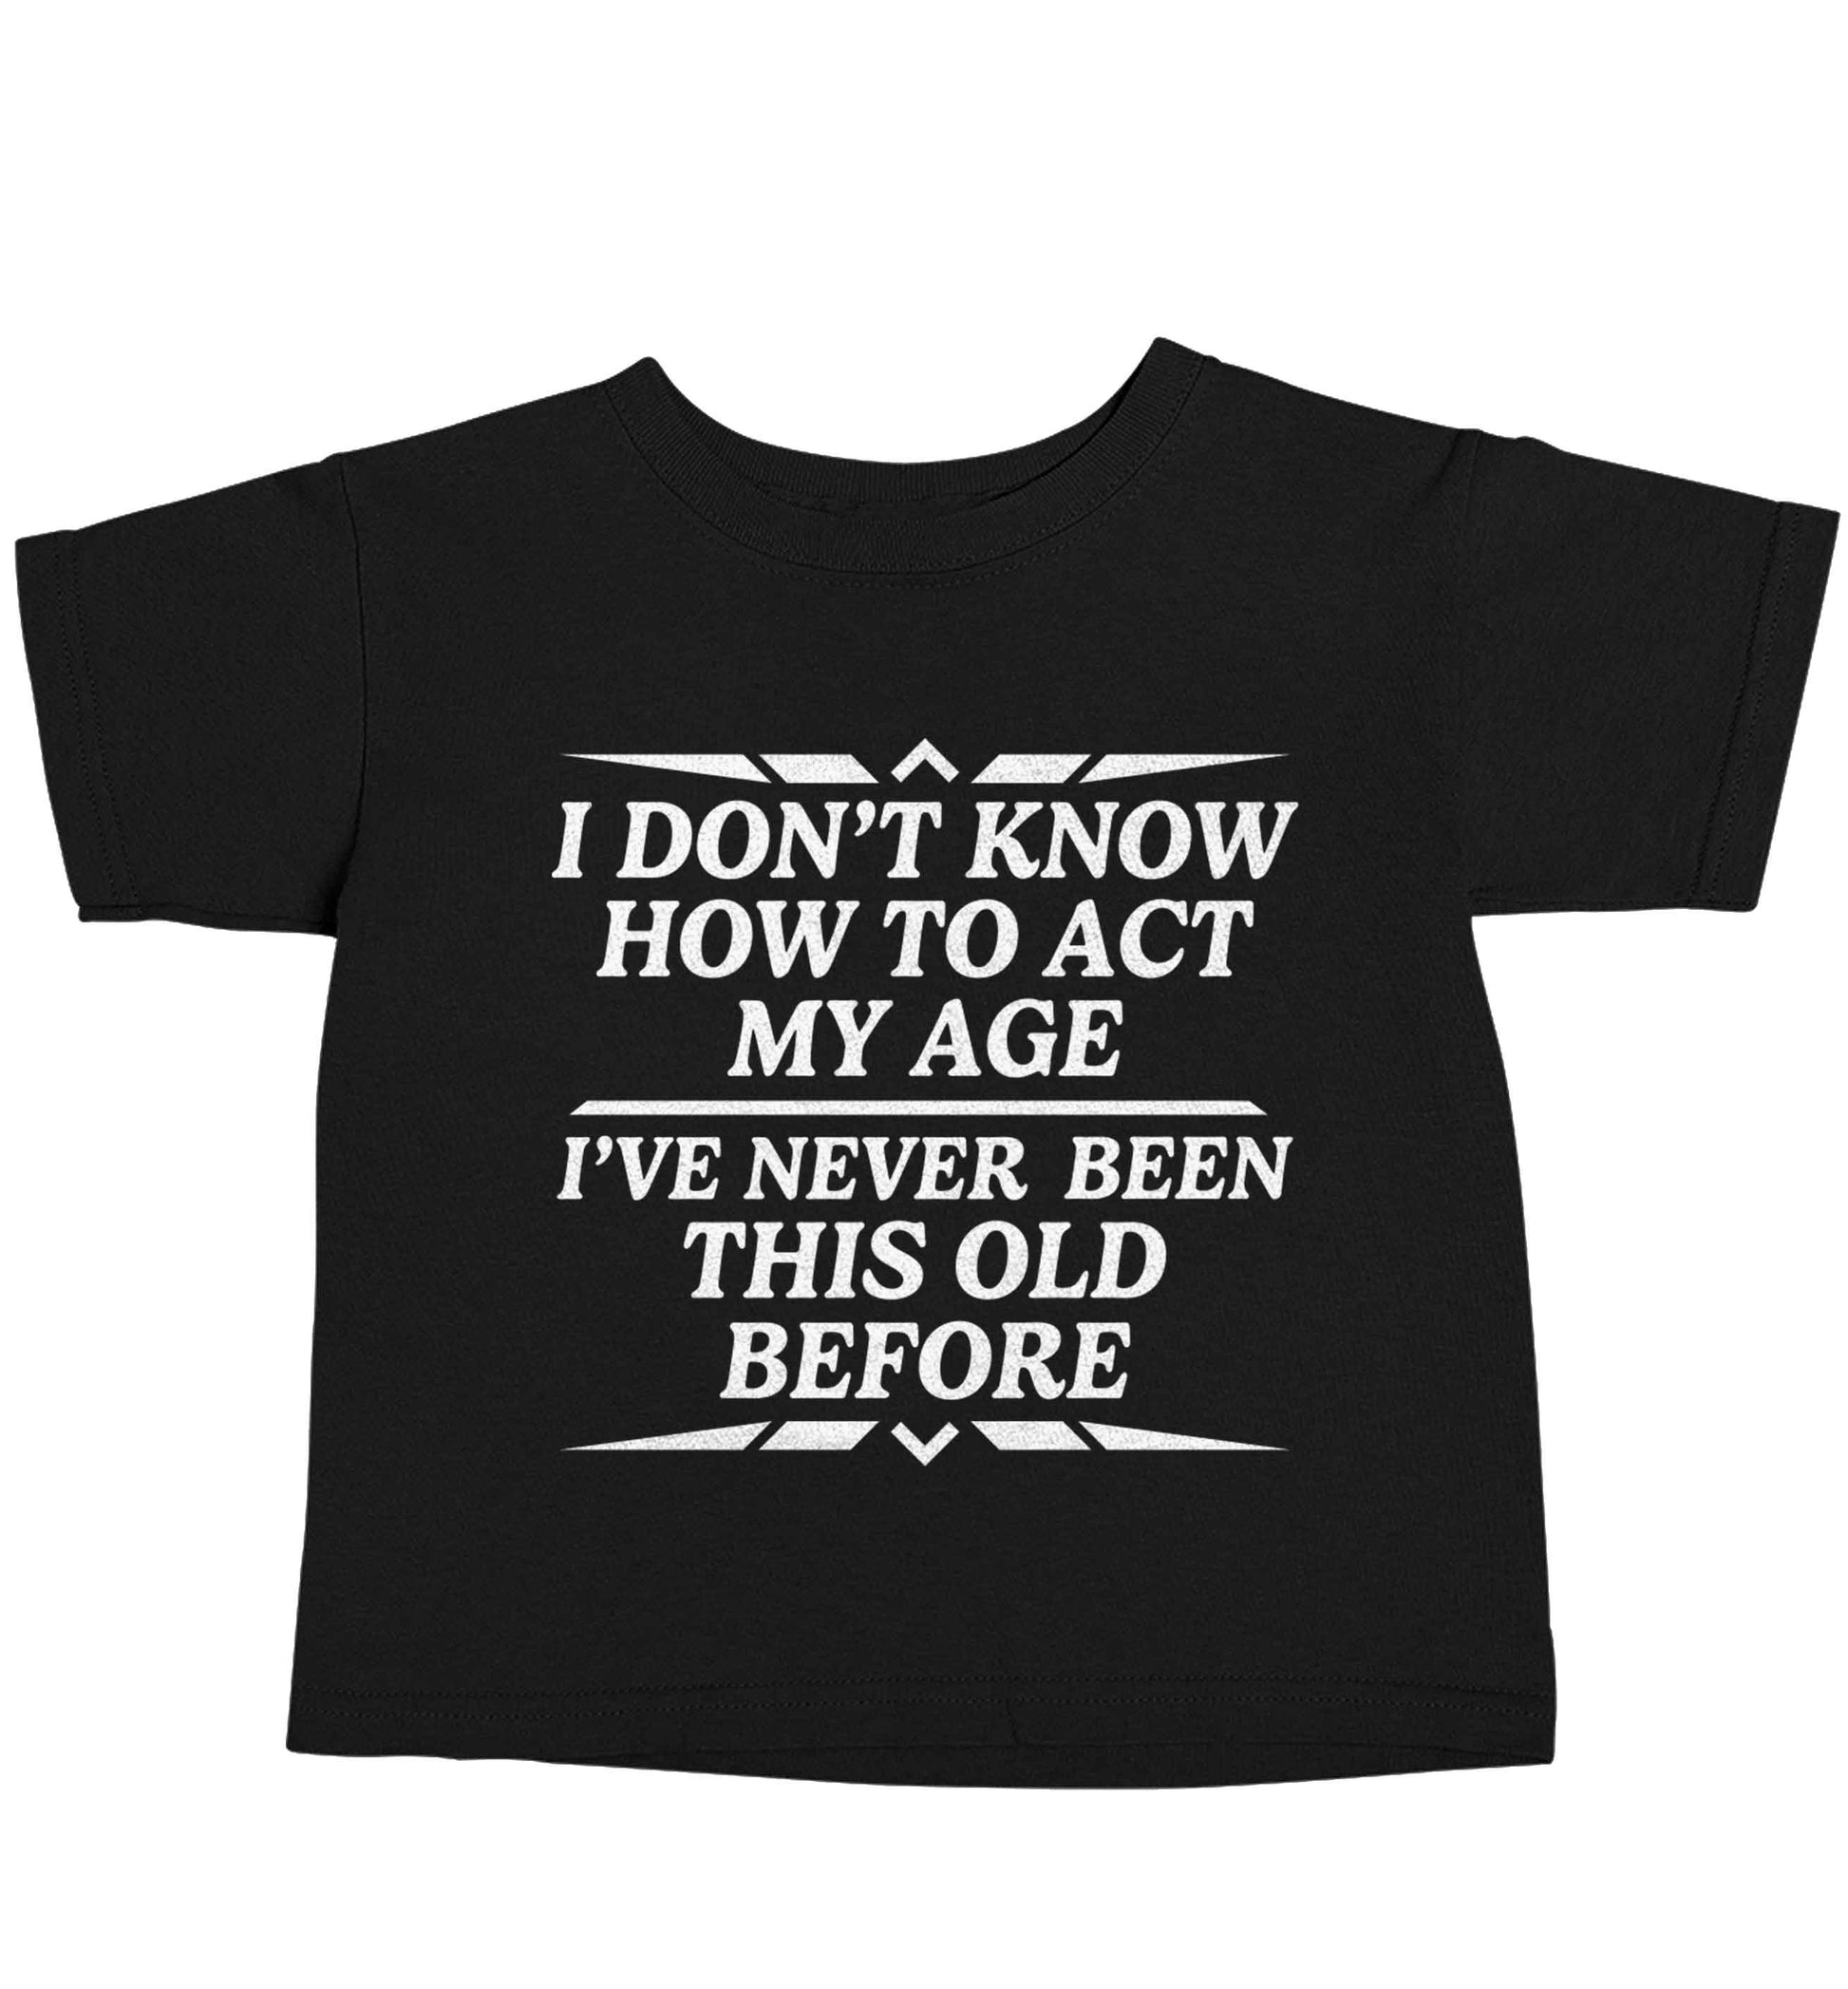 I don't know how to act my age I've never been this old before Black baby toddler Tshirt 2 years